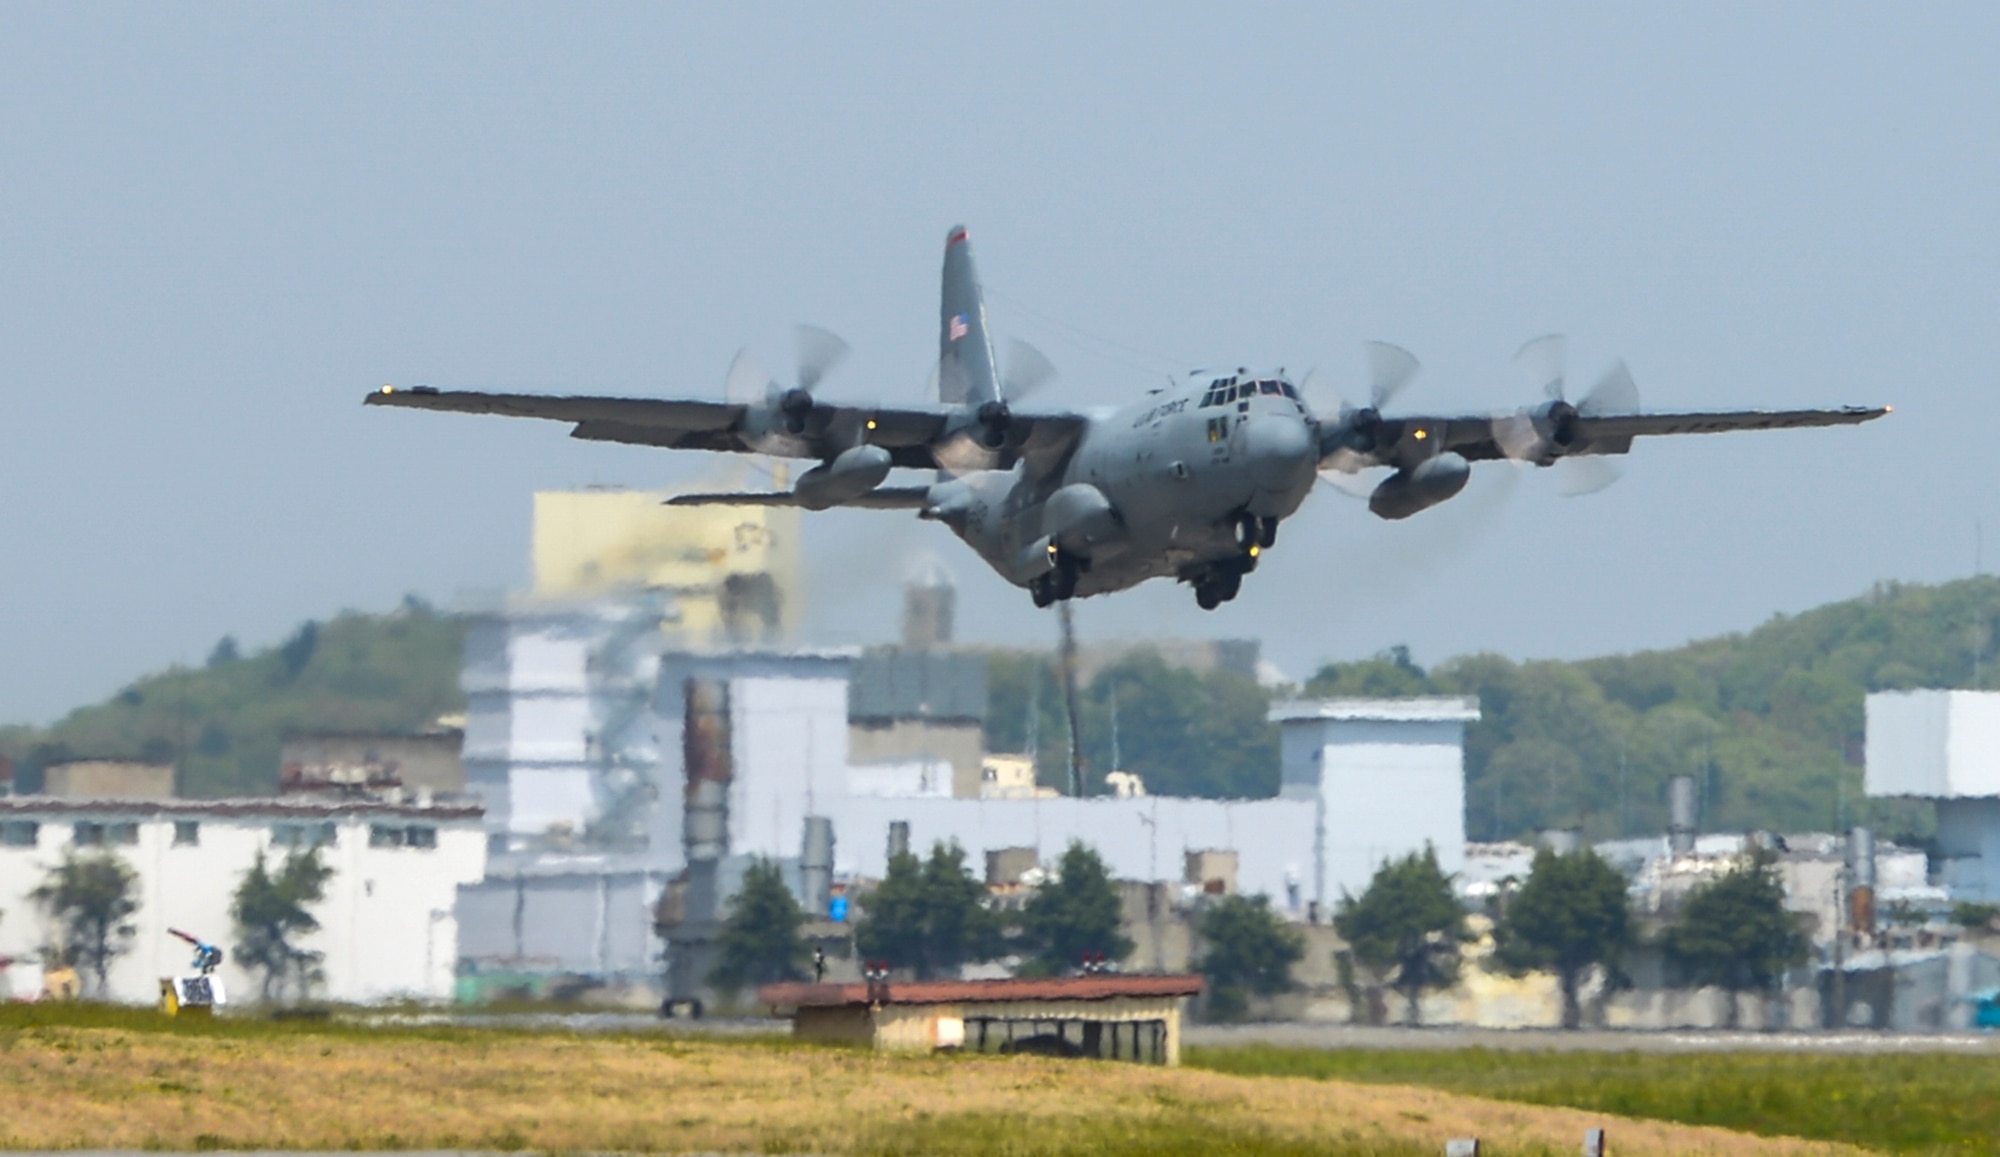 A C-130 Hercules takes off from Yokota Air Base, Japan, April 18, 2016. The 374th Airlift Wing sent two aircraft in support of the Government of Japan in their relief efforts for the series of earthquakes that took place in the Kyushu region recently. The aircraft transported heavy vehicles and personnel from Chitose Air Base, Hokkaido to Kyushu. (U.S. Air Force photo by Airman 1st Class Elizabeth Baker/Released)